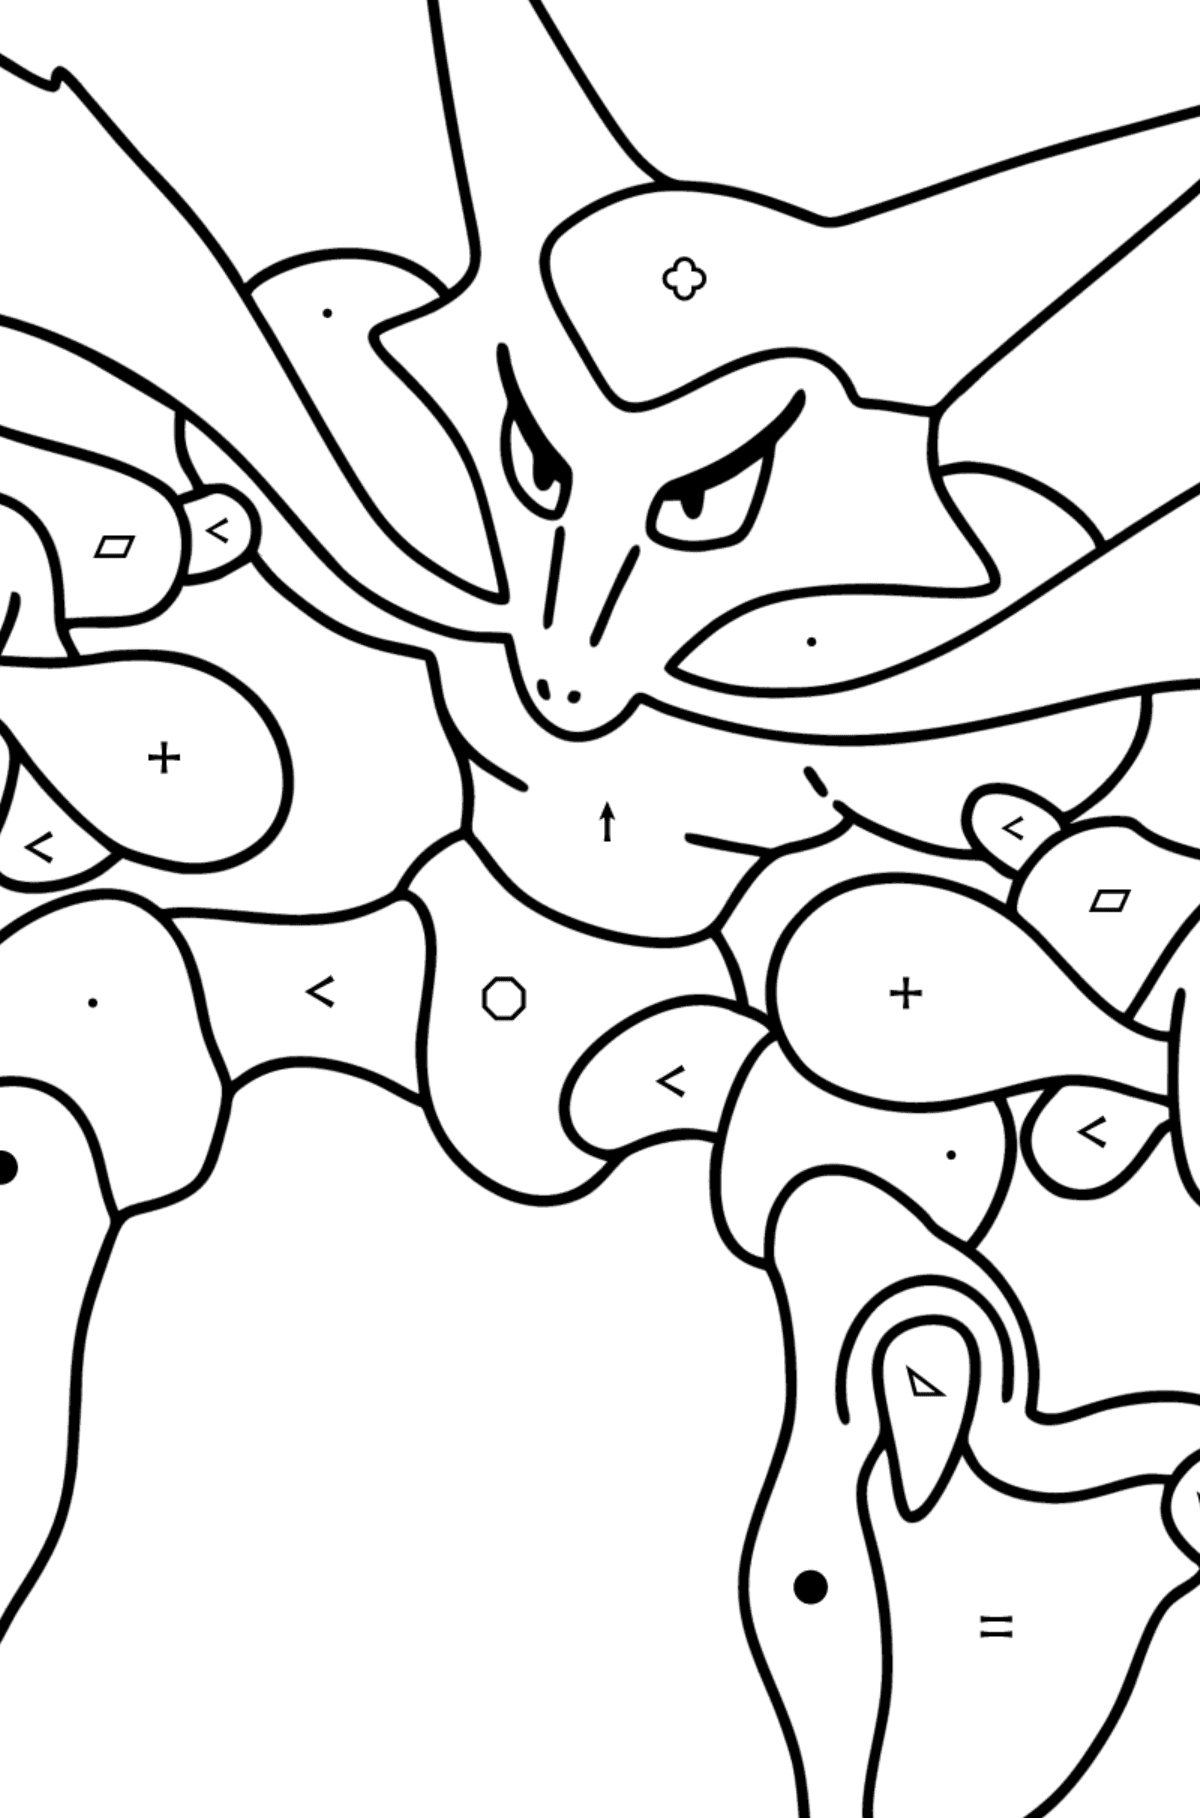 Coloring page Pokemon Go Alakazam - Coloring by Symbols and Geometric Shapes for Kids